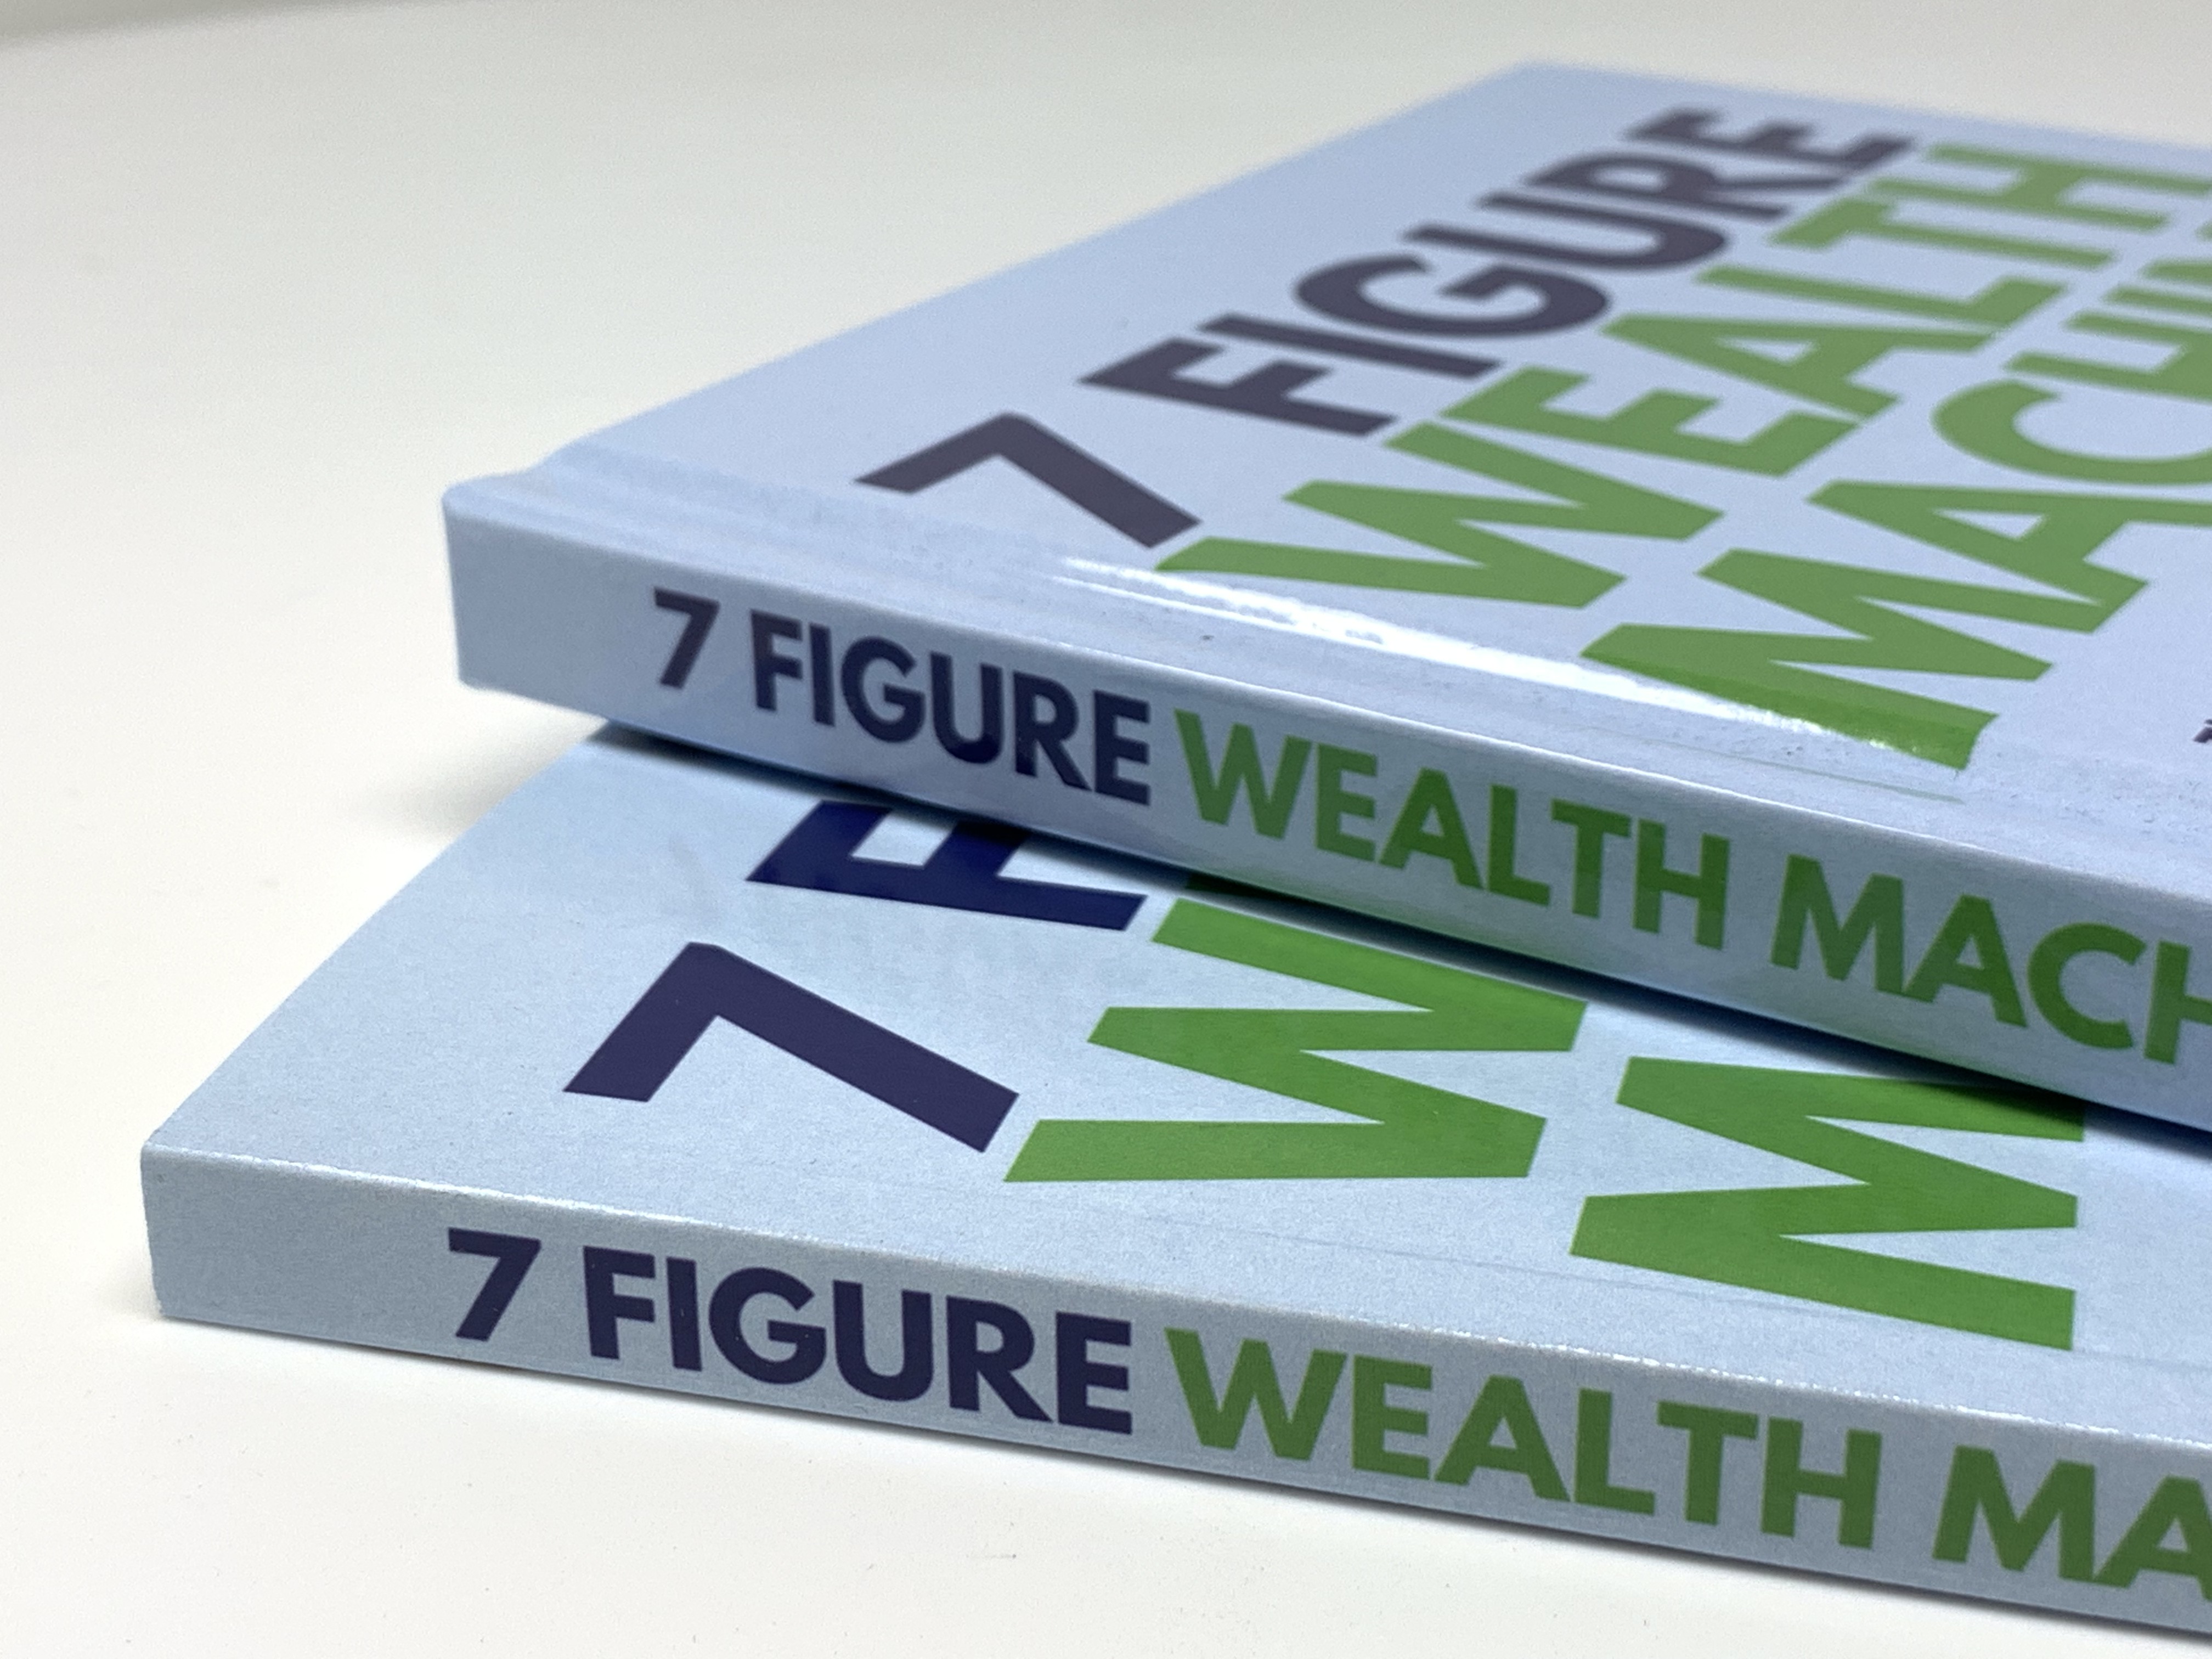 "7 Figure Wealth Machine" books in hardcover and paperback